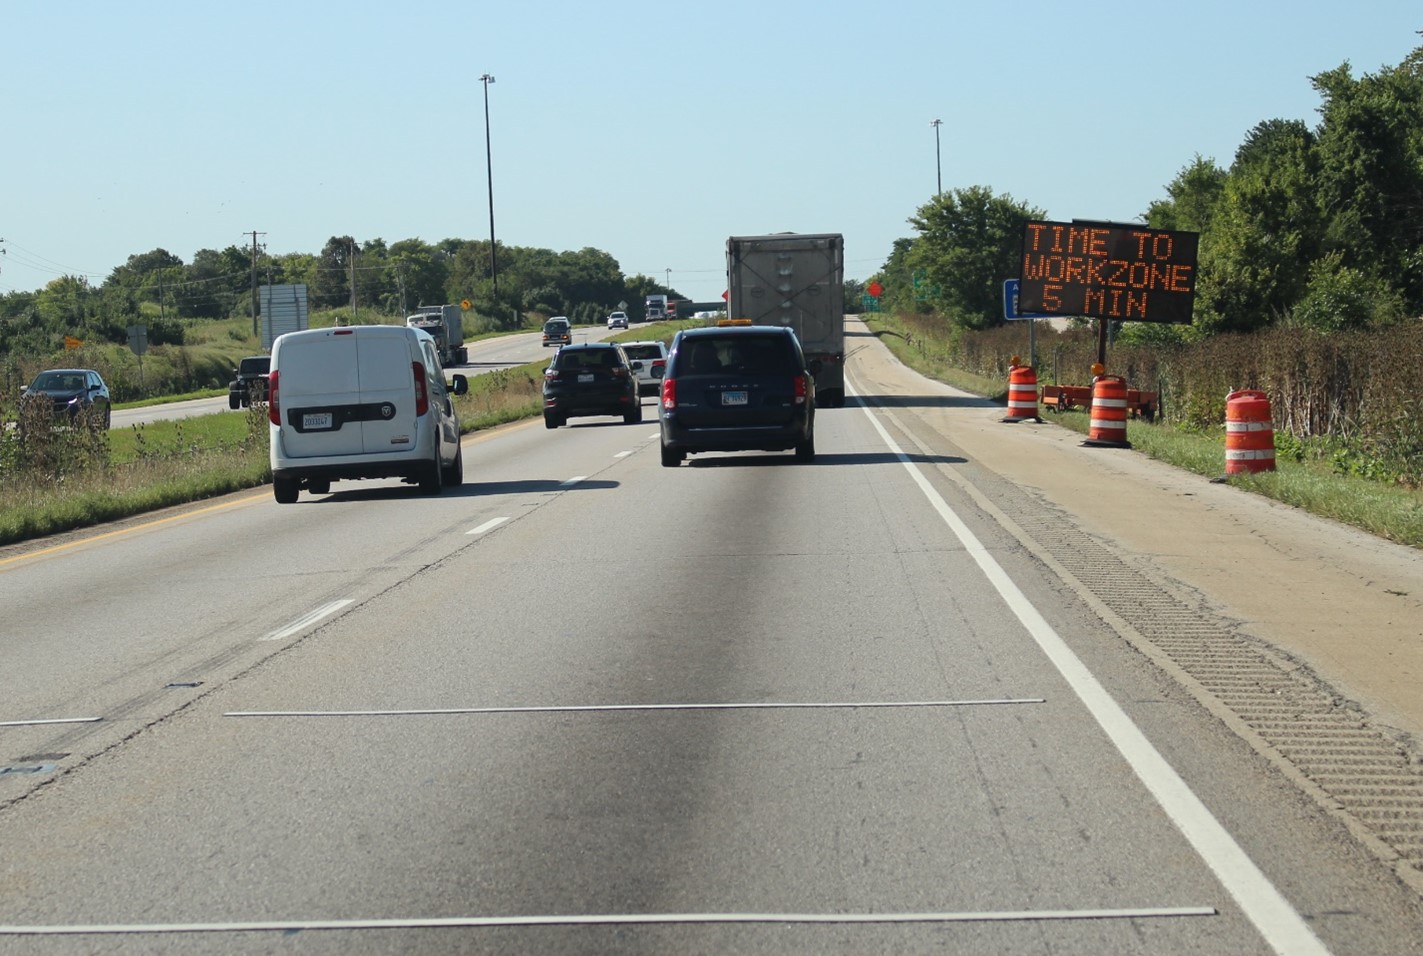 Transportation agencies have used smart work zone systems, such as the variable message sign shown above, for more than 20 years. These systems provide real-time data to drivers to improve work zone safety and mobility.